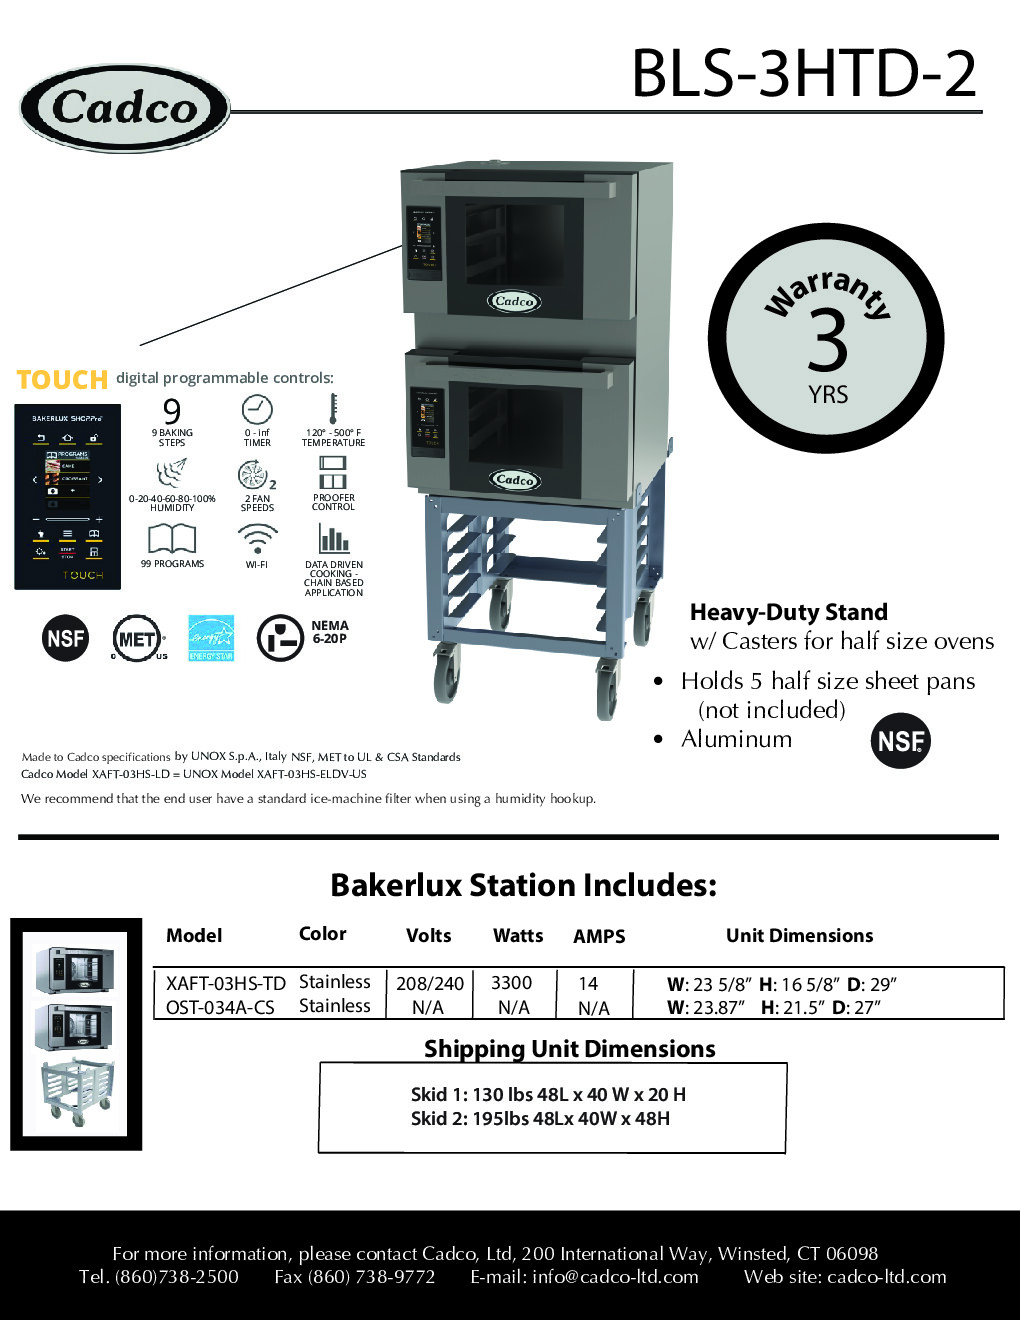 Cadco BLS-3HTD-2 Double-Deck Electric Convection Oven w/ Digital Touch Controls, Half-Size